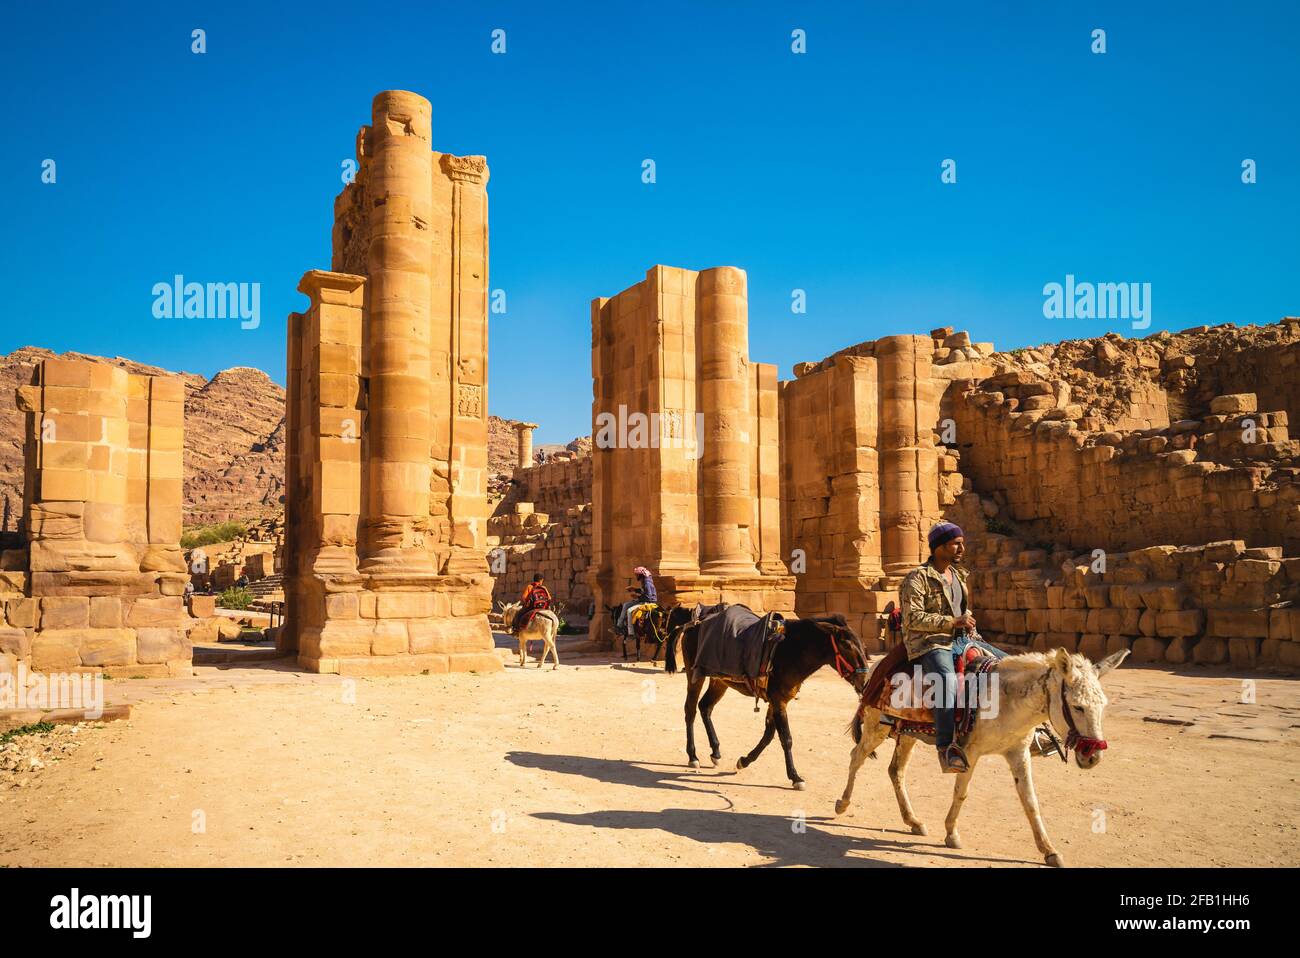 March 22, 2019: A man riding a donkey through the Hadrian Gate ,aka the Temenos Gate, located at the end of the Colonnaded Street in petra, jordan. Do Stock Photo